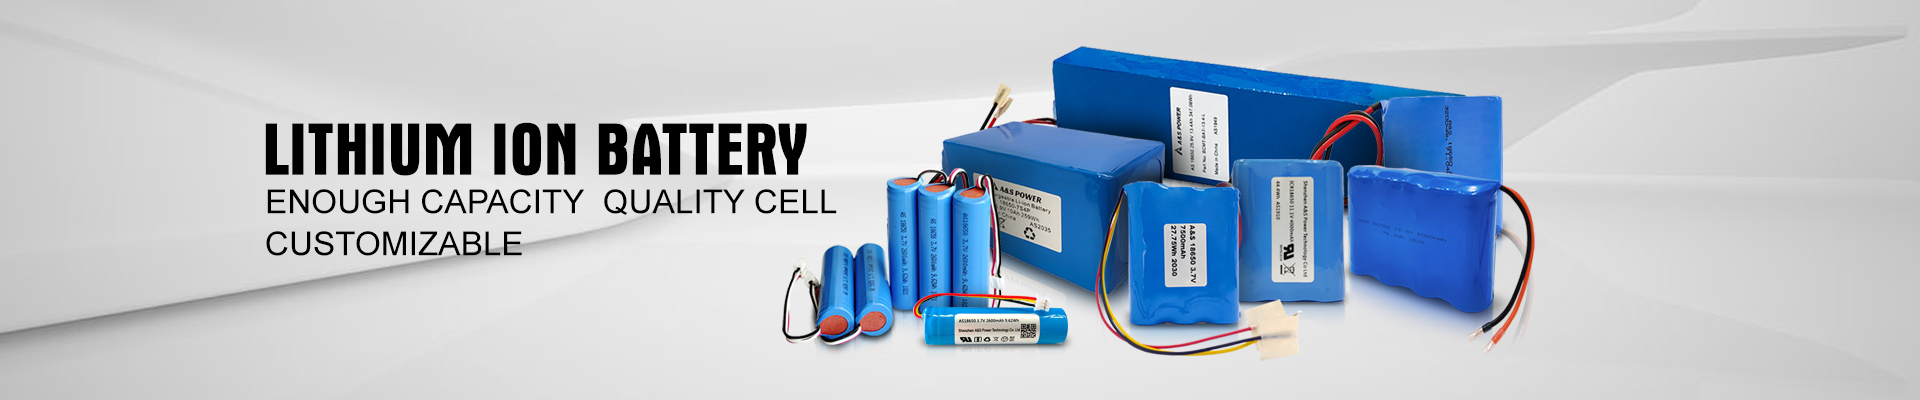 A&S Power 18650 Lithium Ion Battery